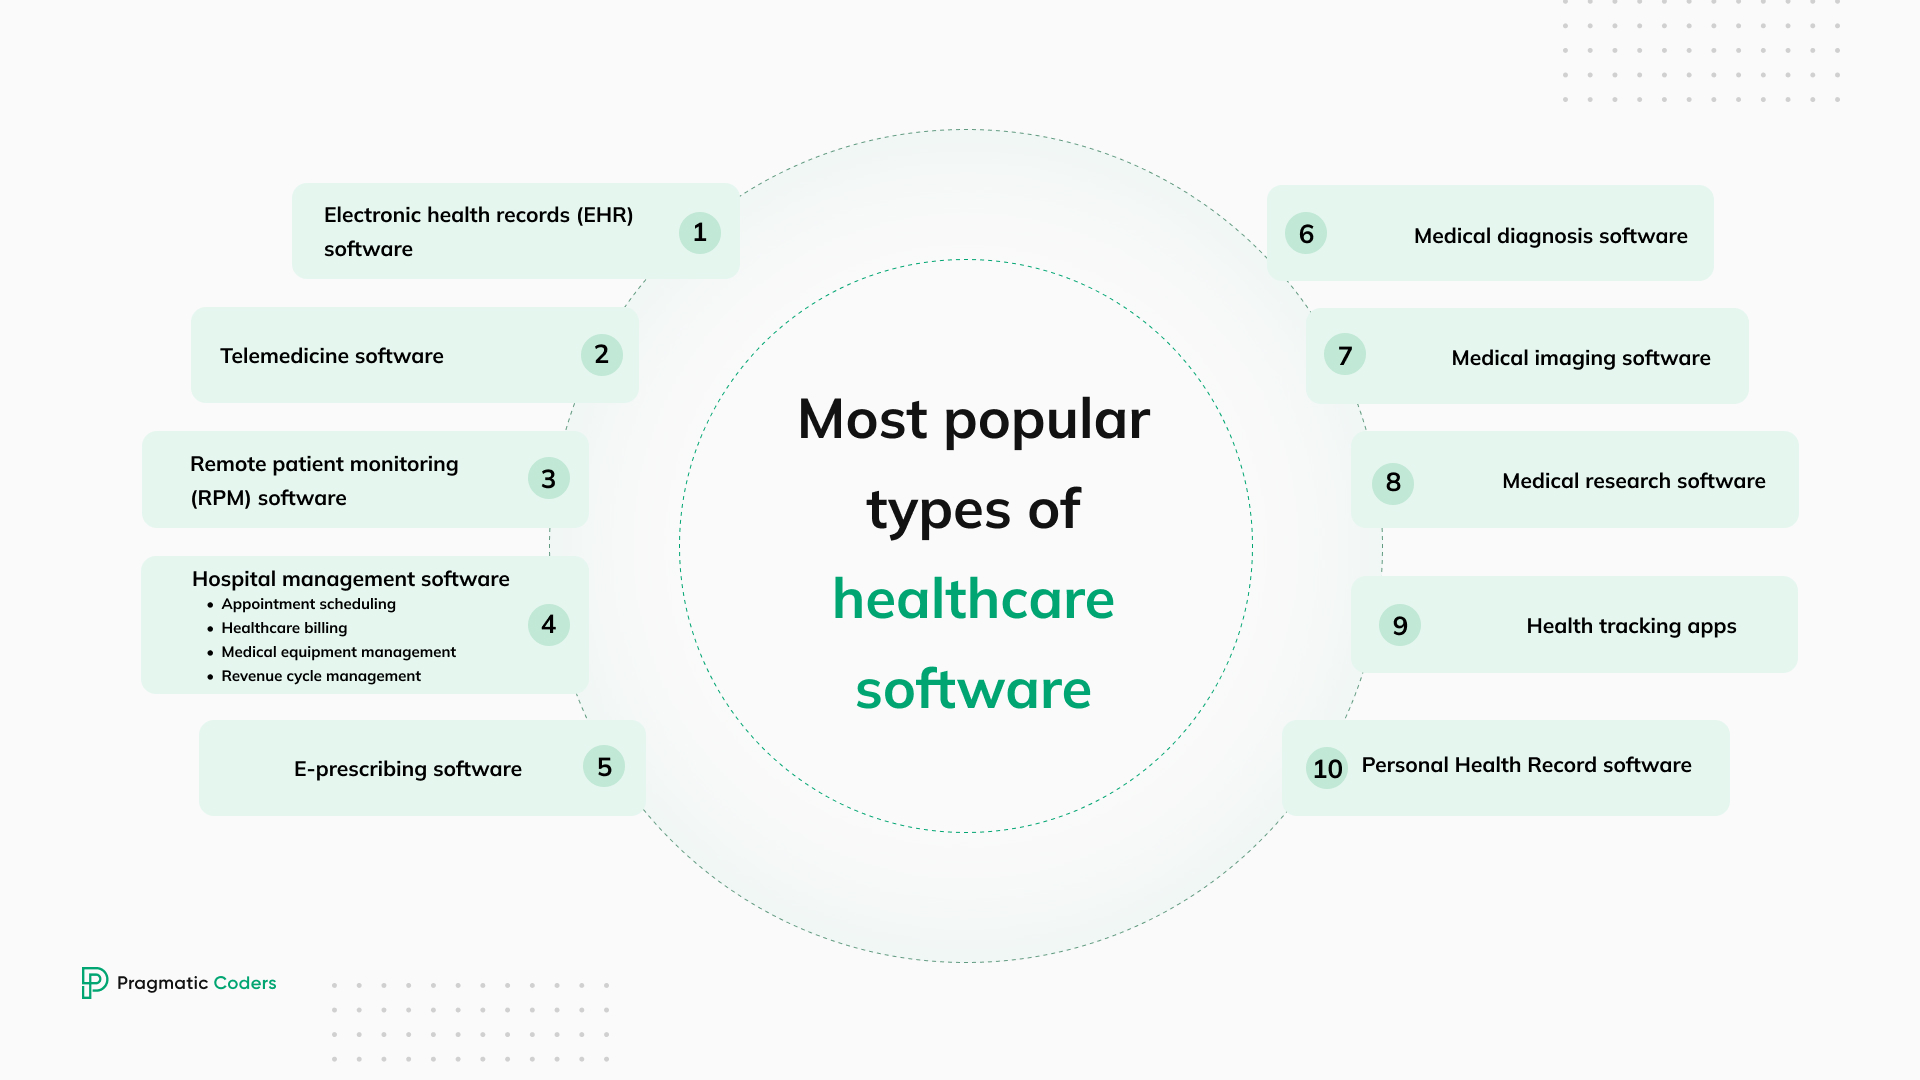 Most popular types of healthcare software